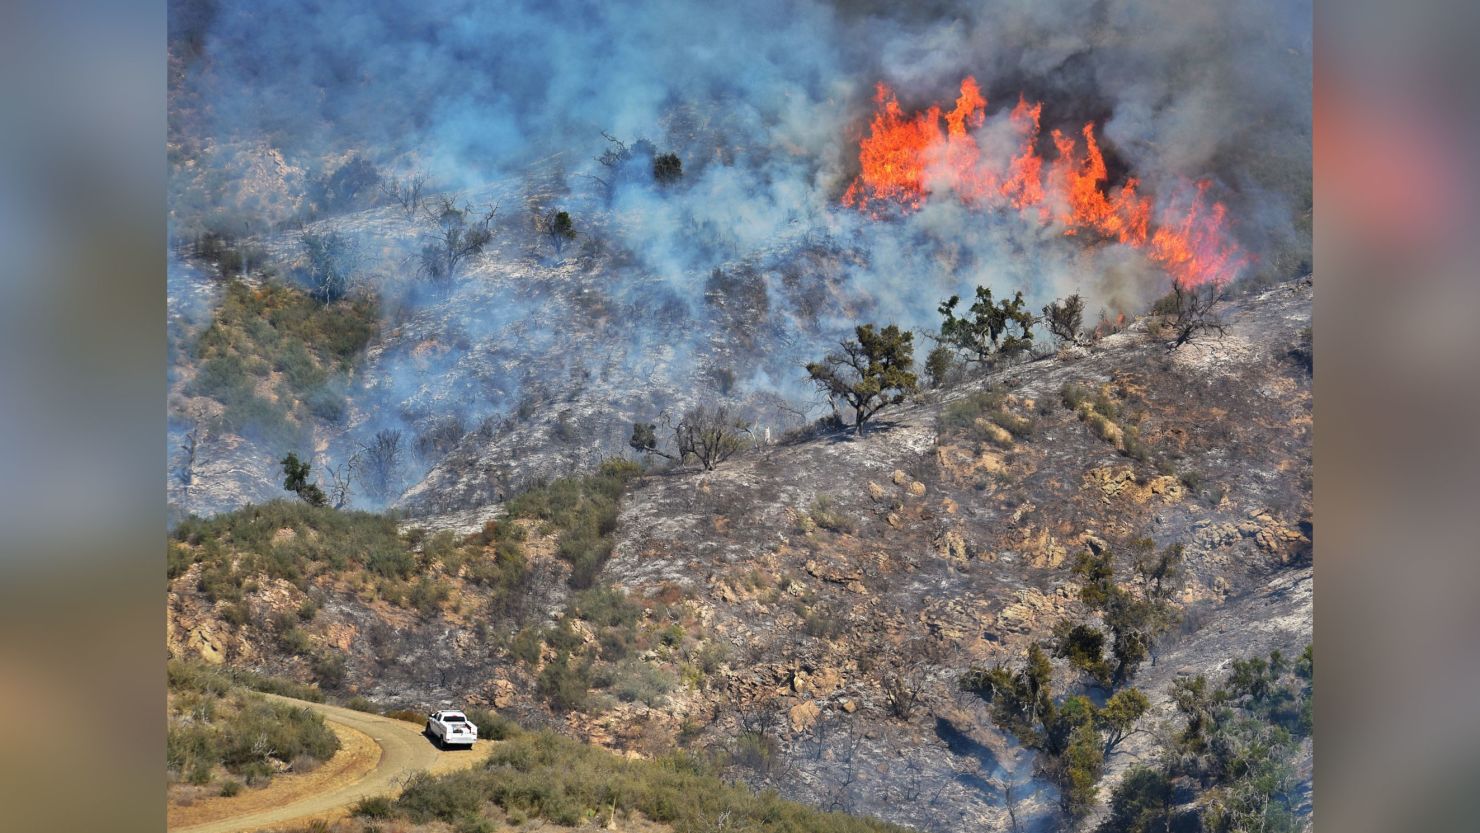 Part of the Alisal Fire burns in California's Las Flores Canyon on Friday afternoon.